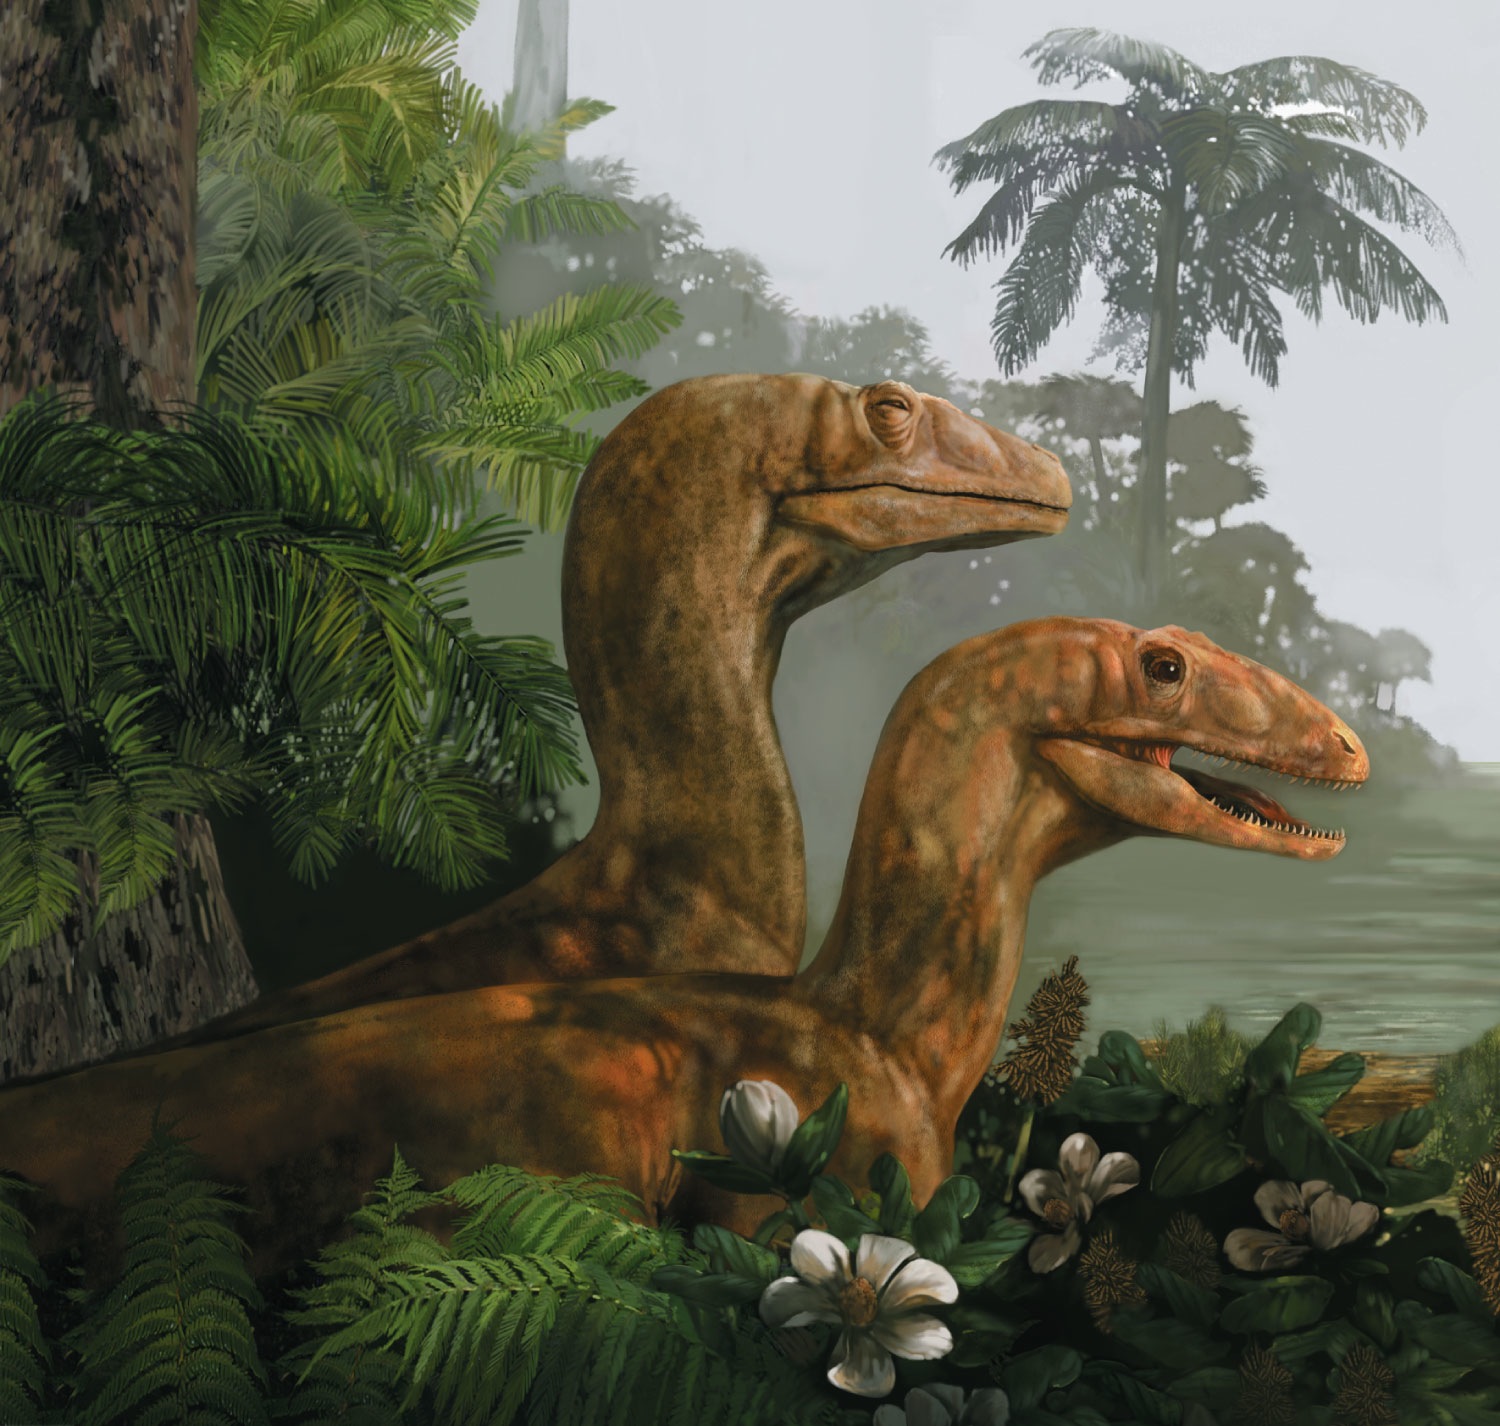 Angiosperms and Dinosaurs